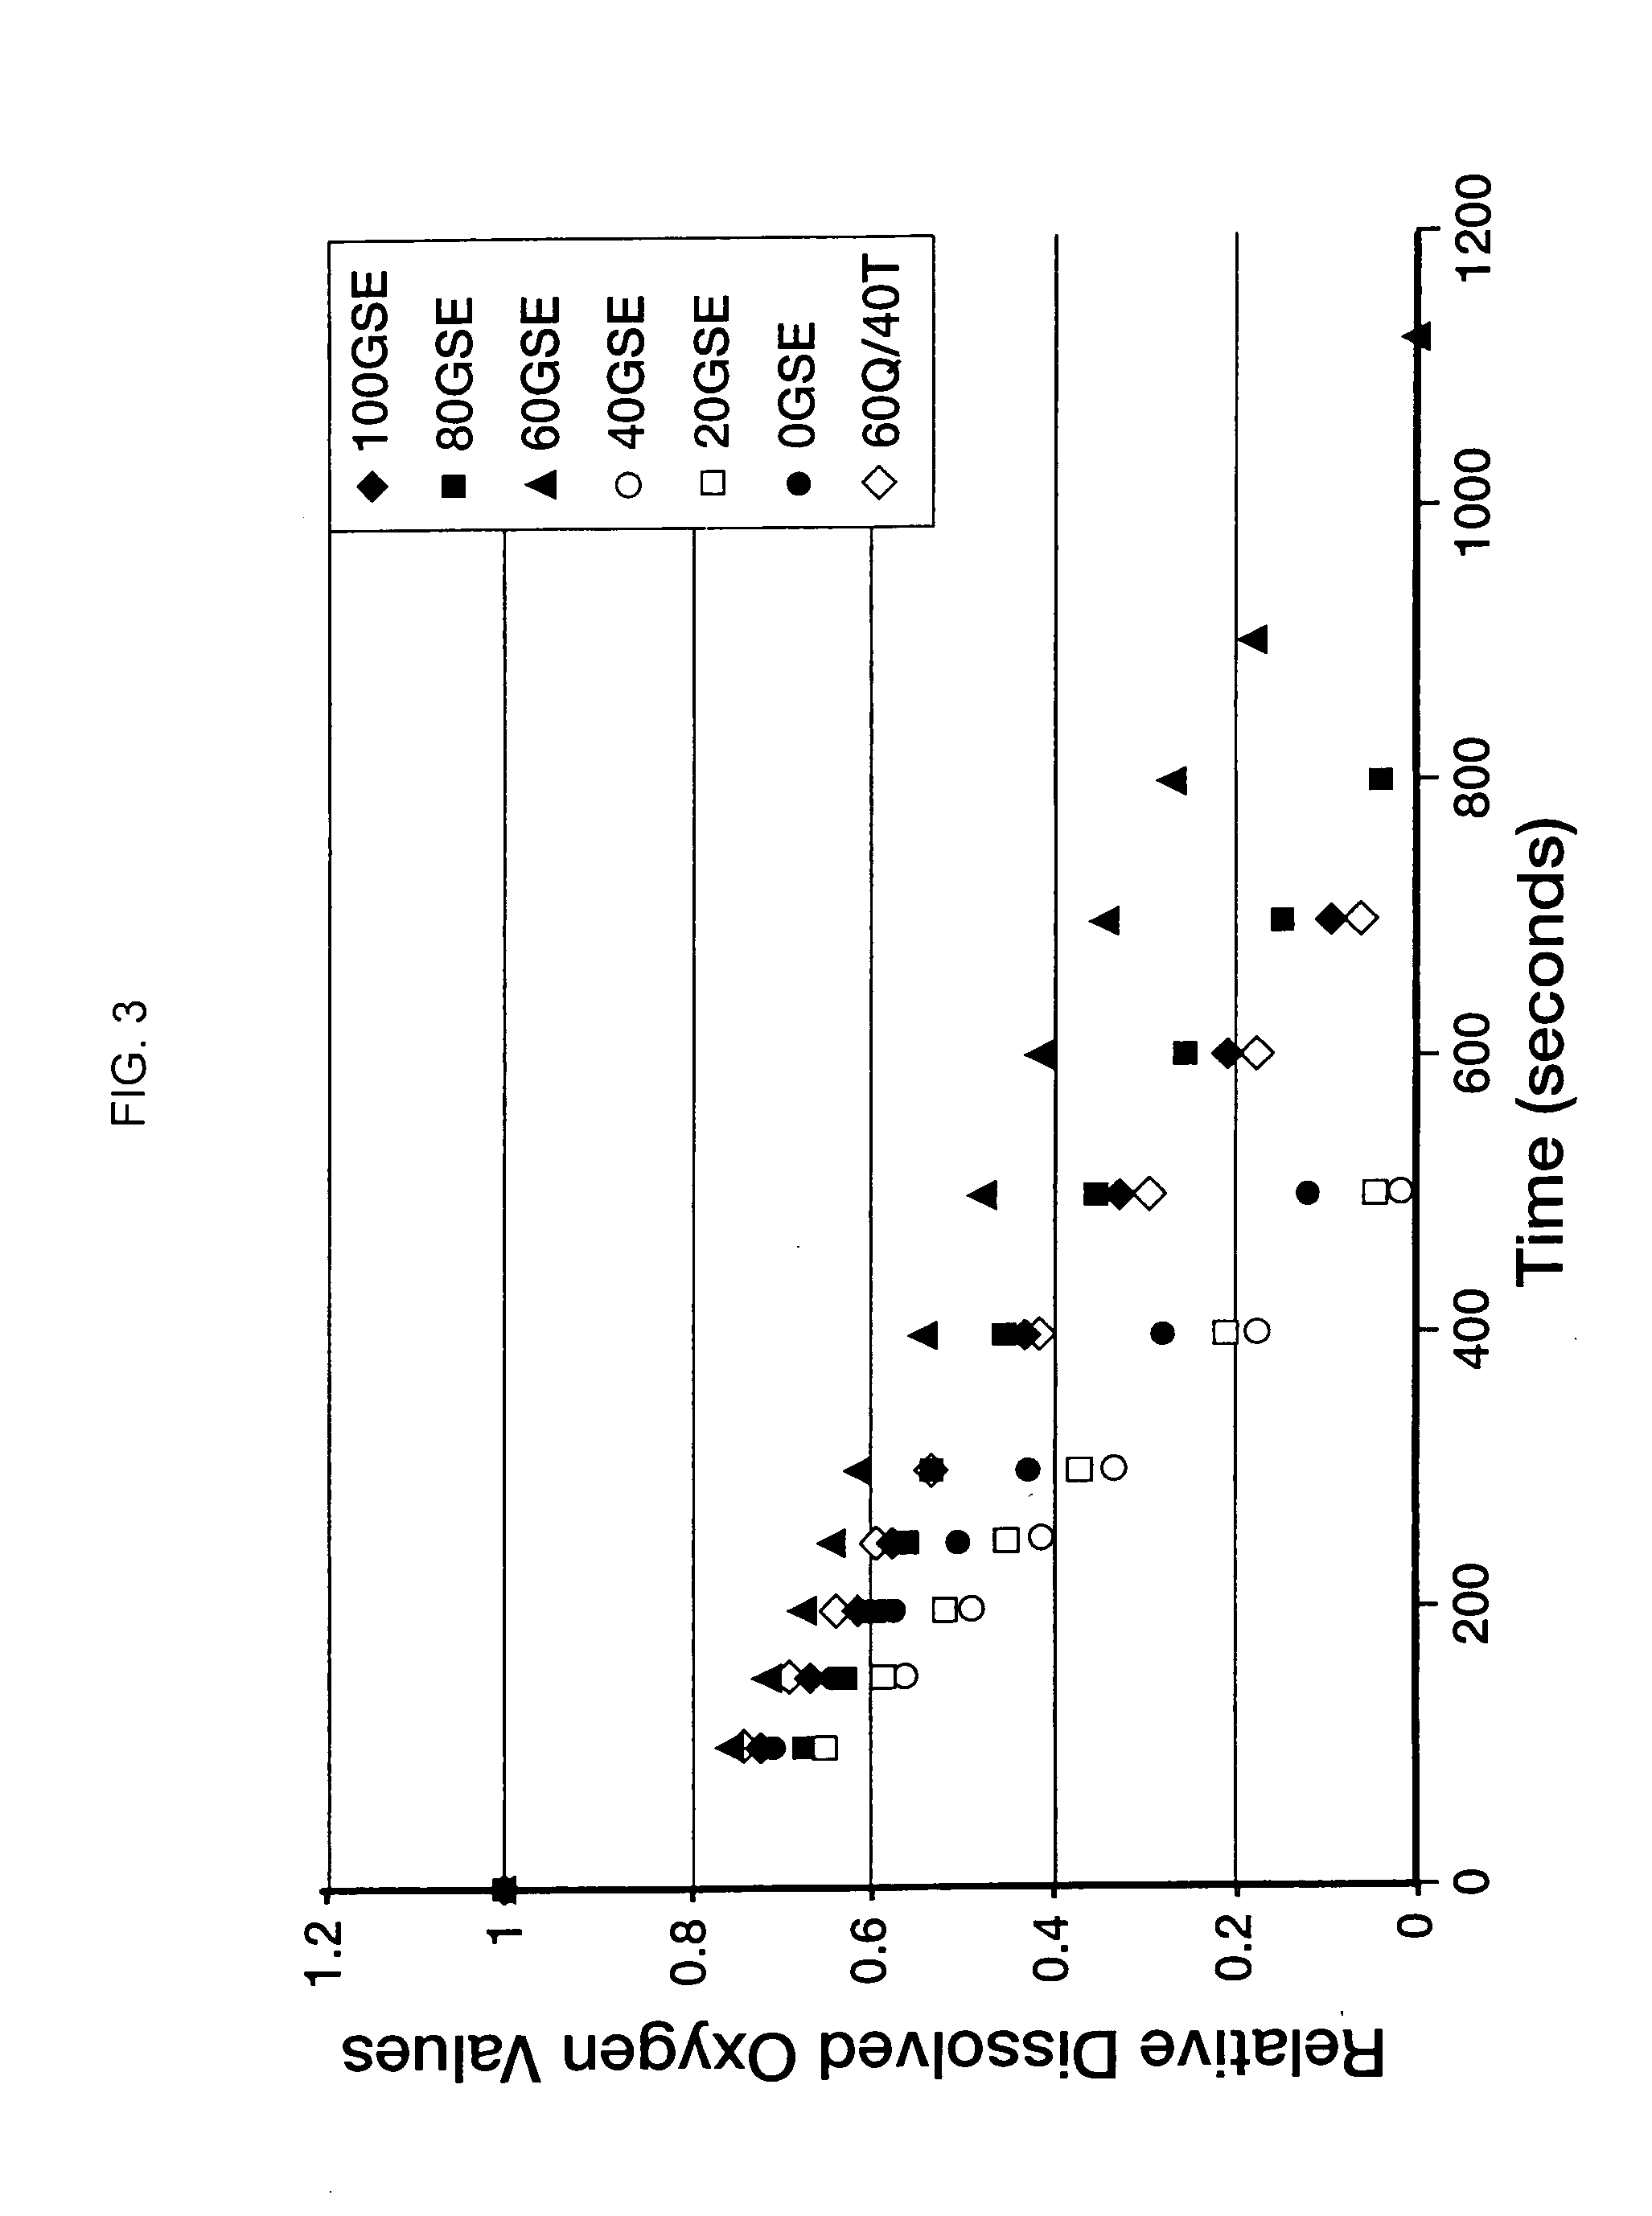 Antioxidant compositions and methods thereto